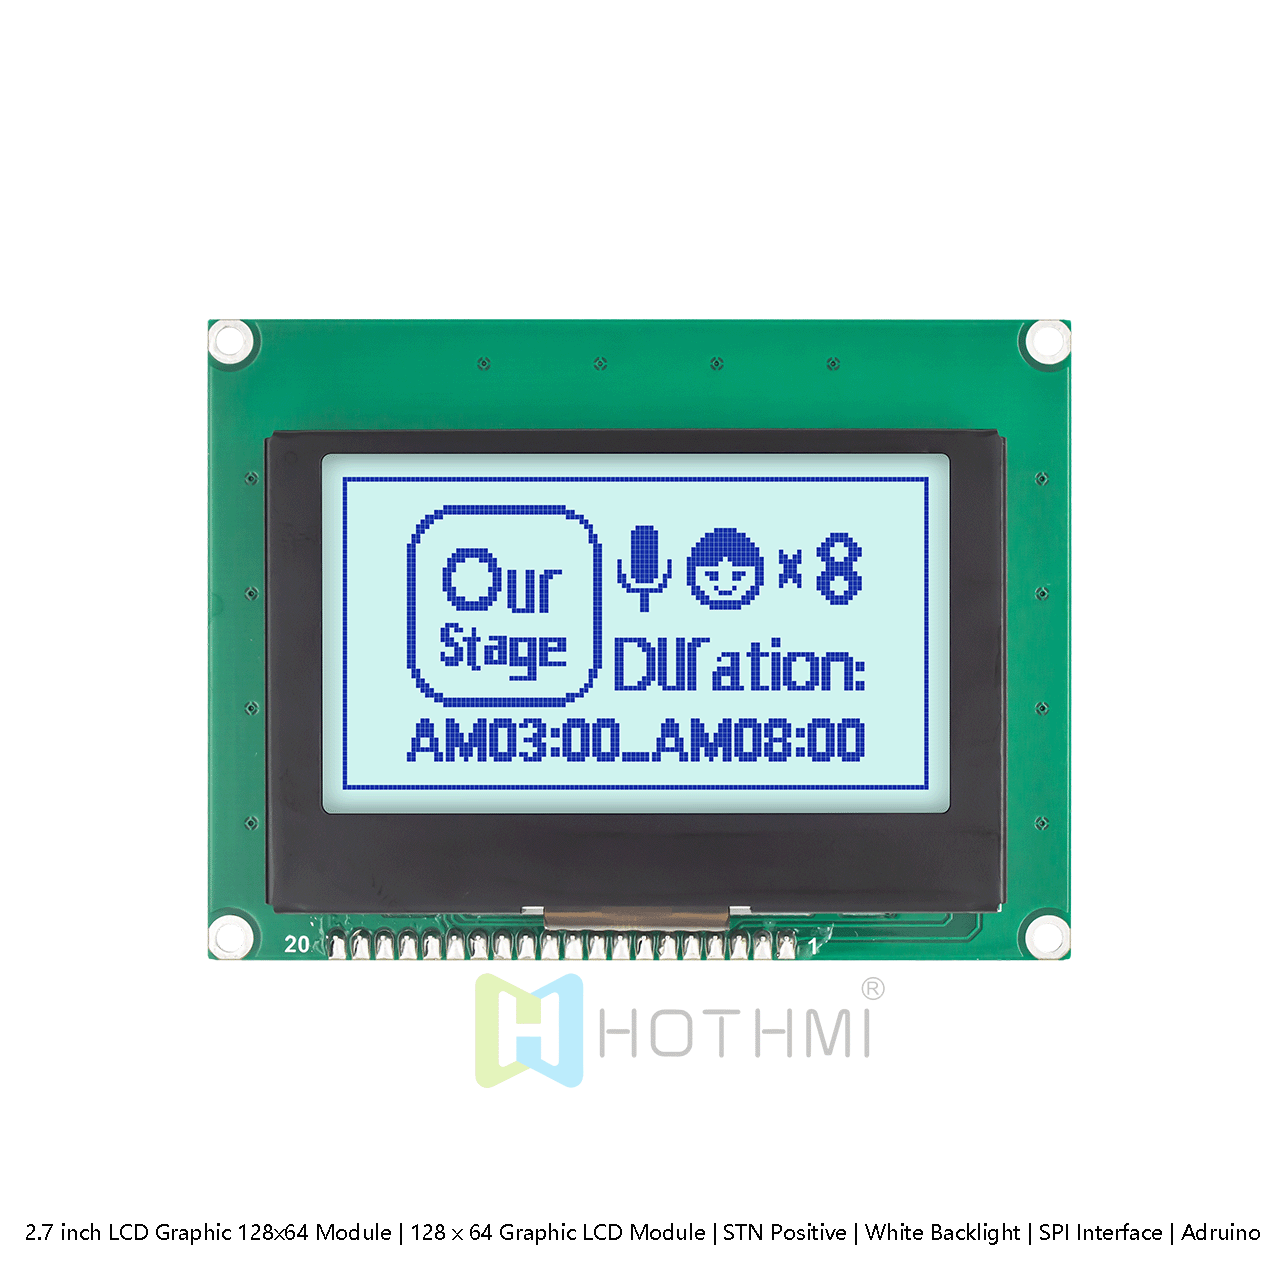 2.7 inch LCD Graphic 128x64 Module | 128 x 64 Graphic LCD Module | STN Positive | White Backlight | SPI Interface | Adruino | Gray Background Blue Characters